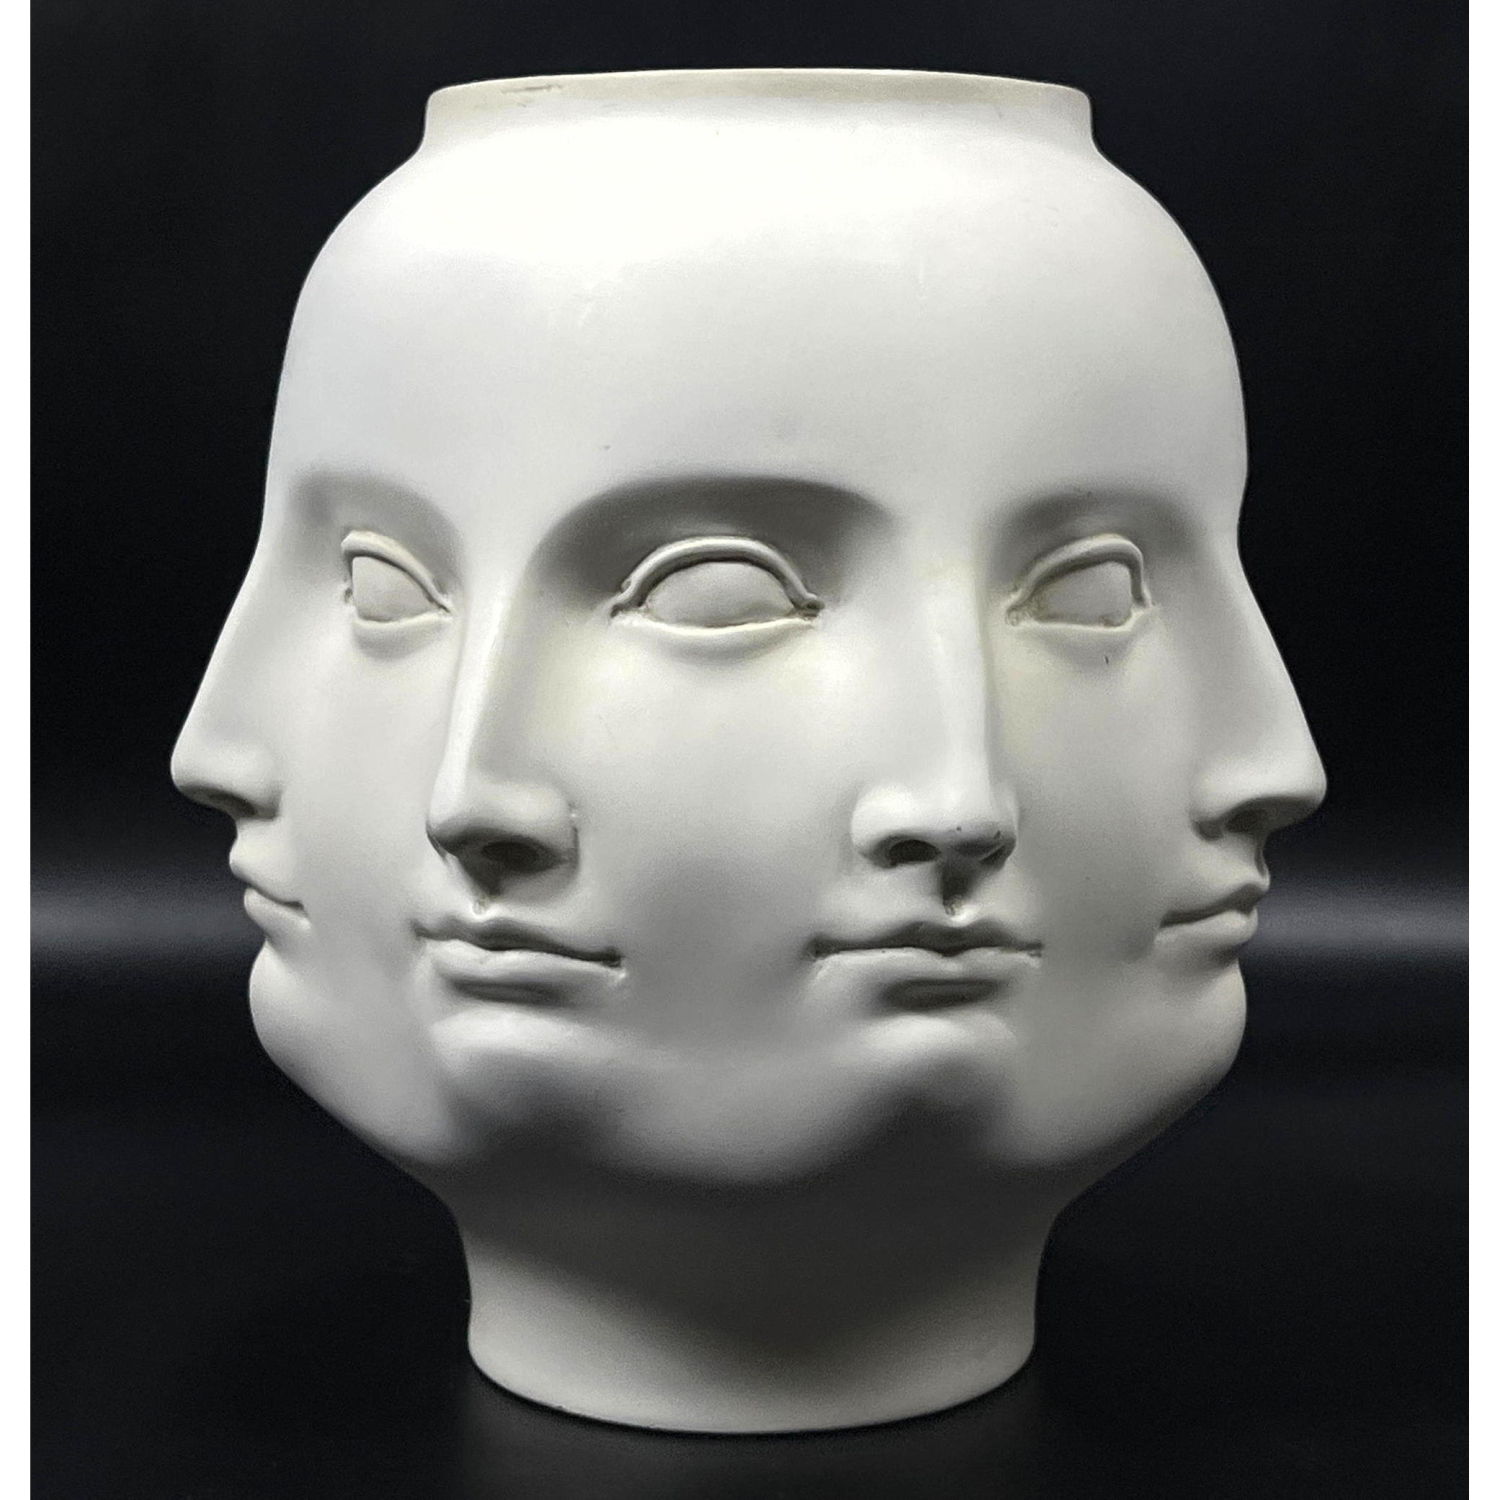 Fornasetti style. TMS 2005. Molded